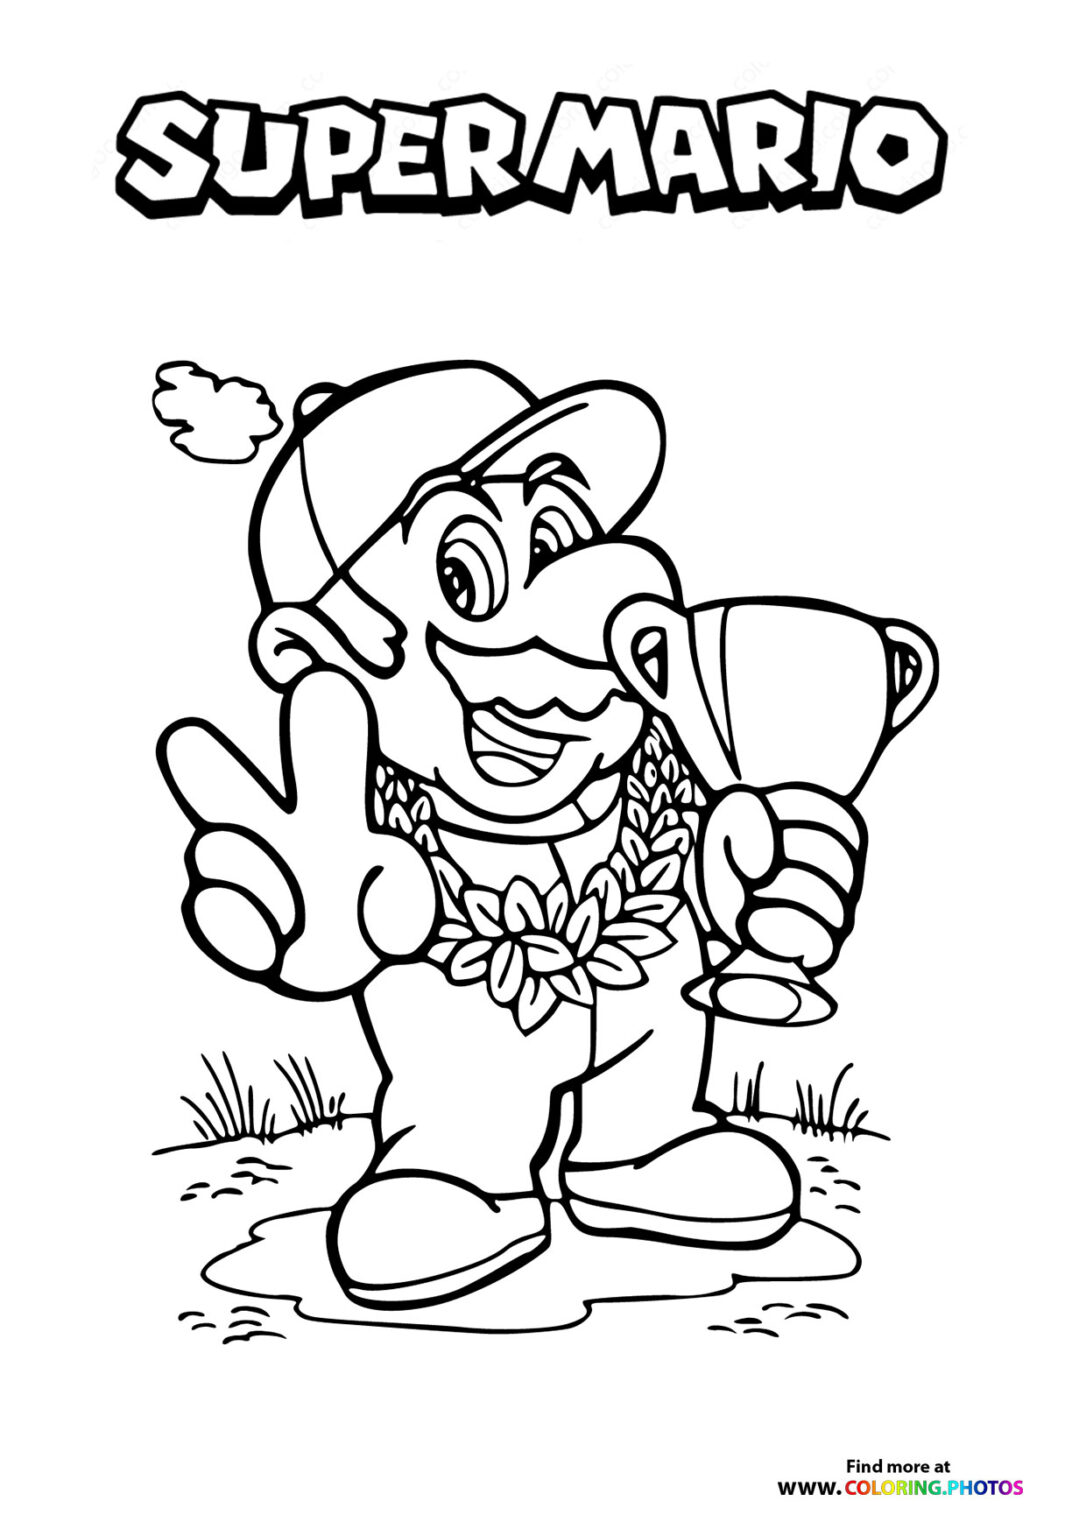 Mario and Luigi - Coloring Pages for kids